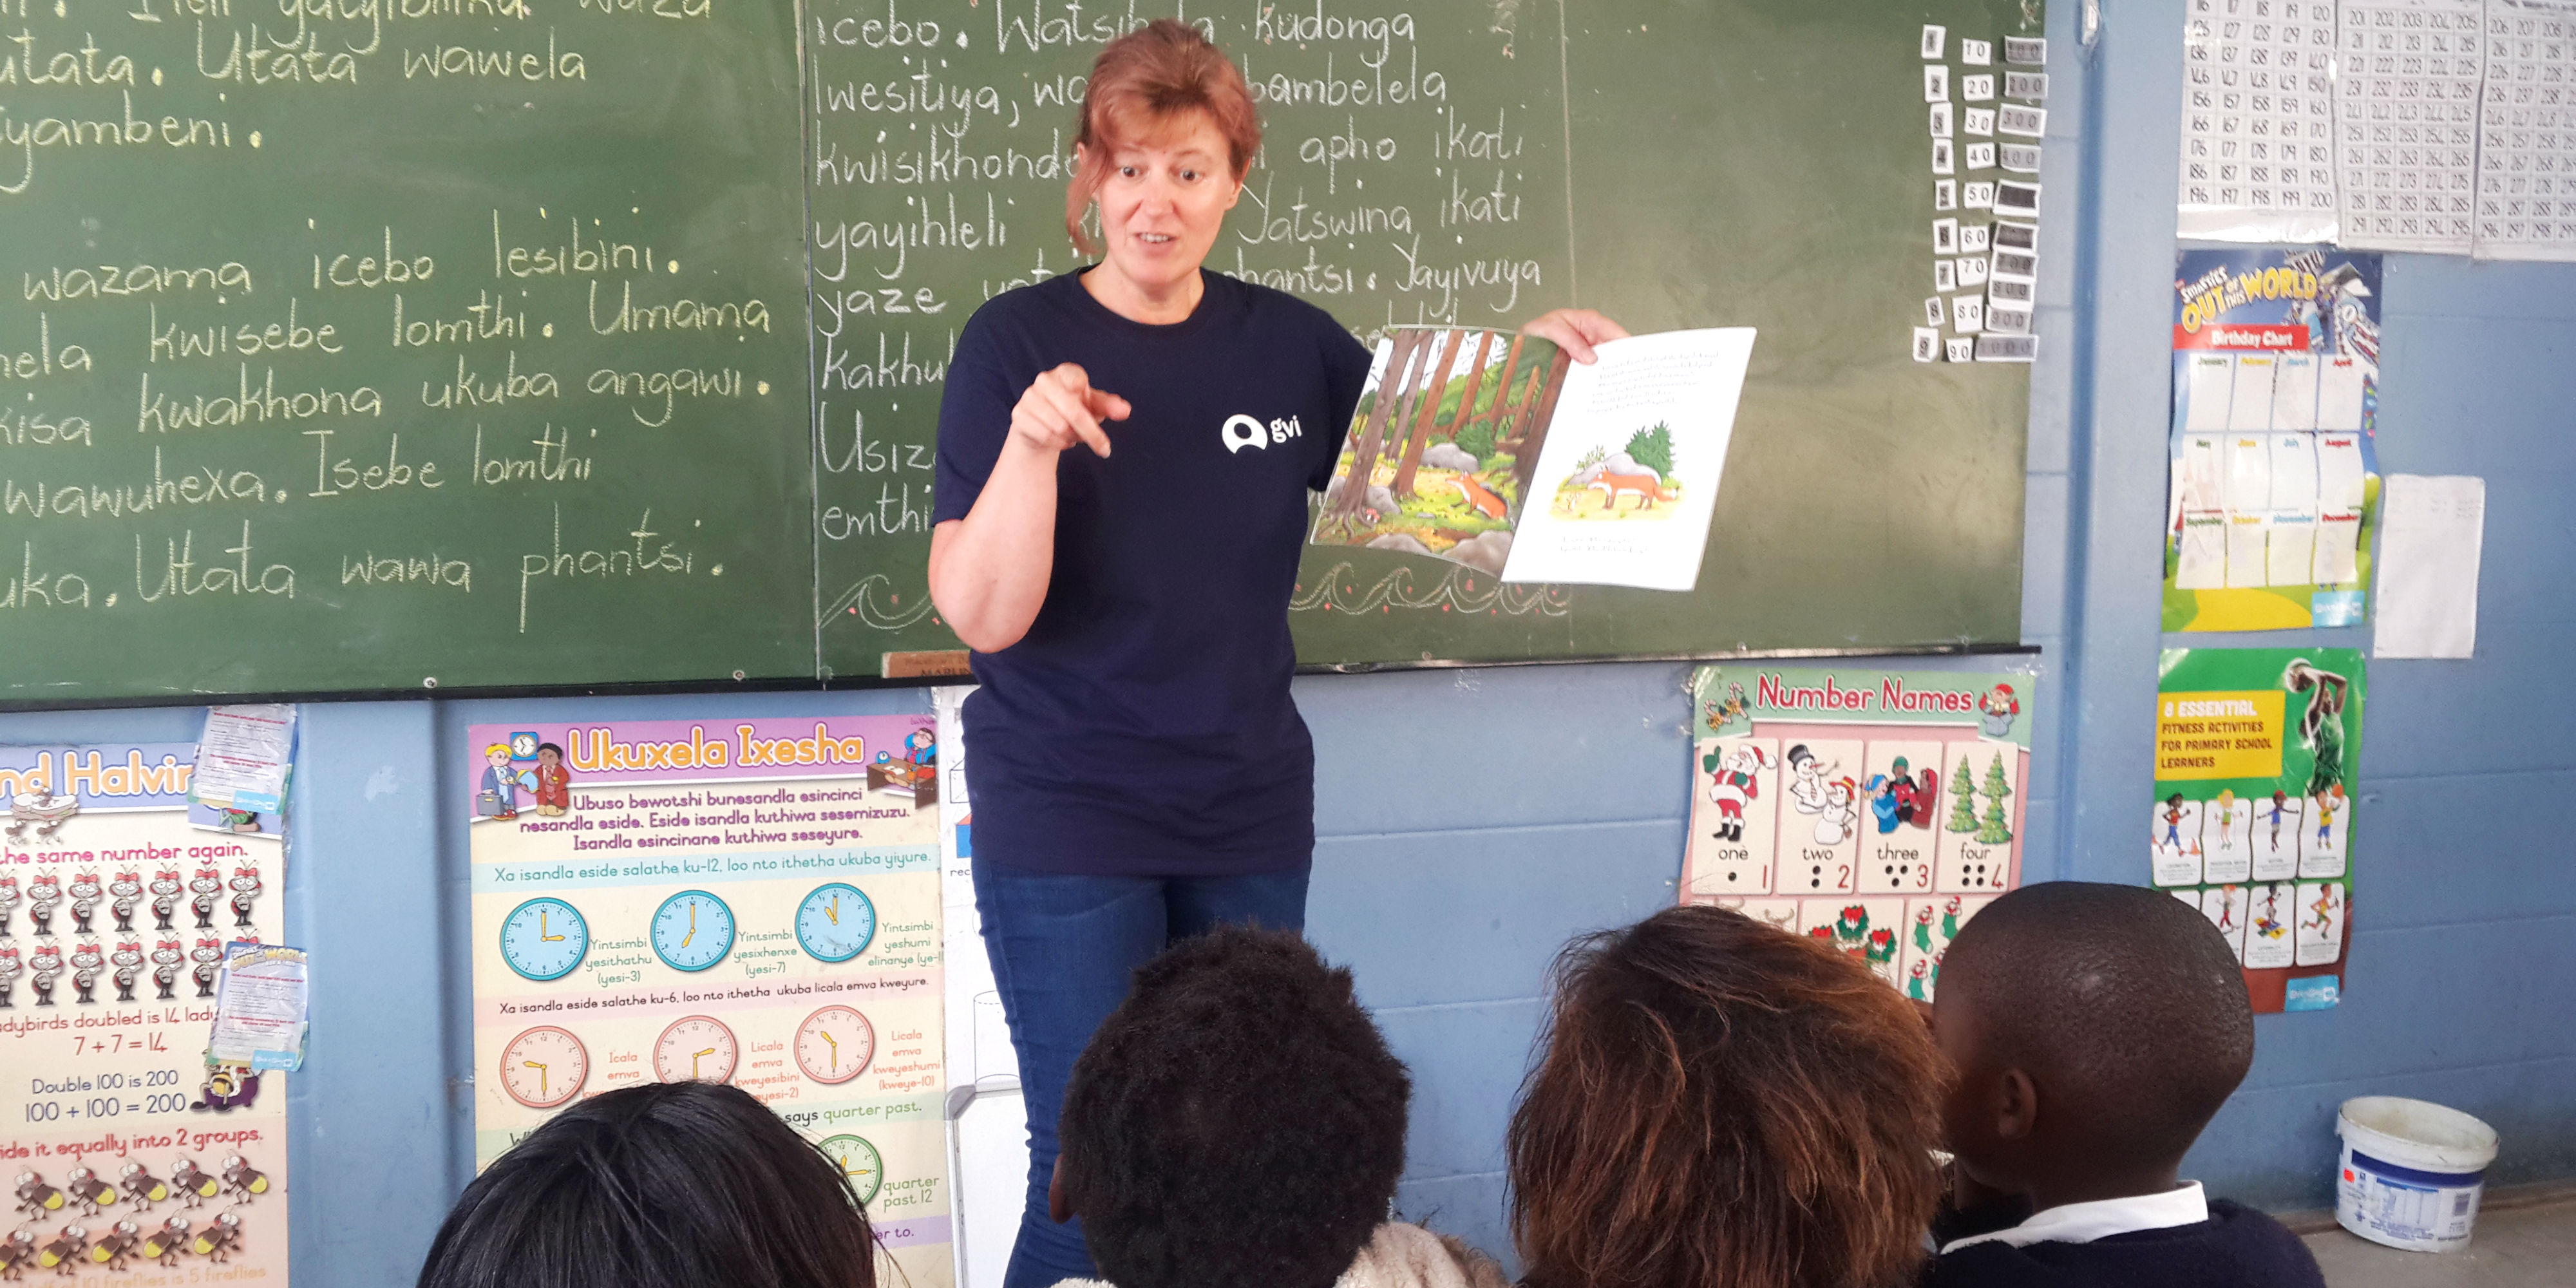 A GVI volunteer in South Africa reads a story to young learners. Education initiatives form an important part of promoting gender equality in education.